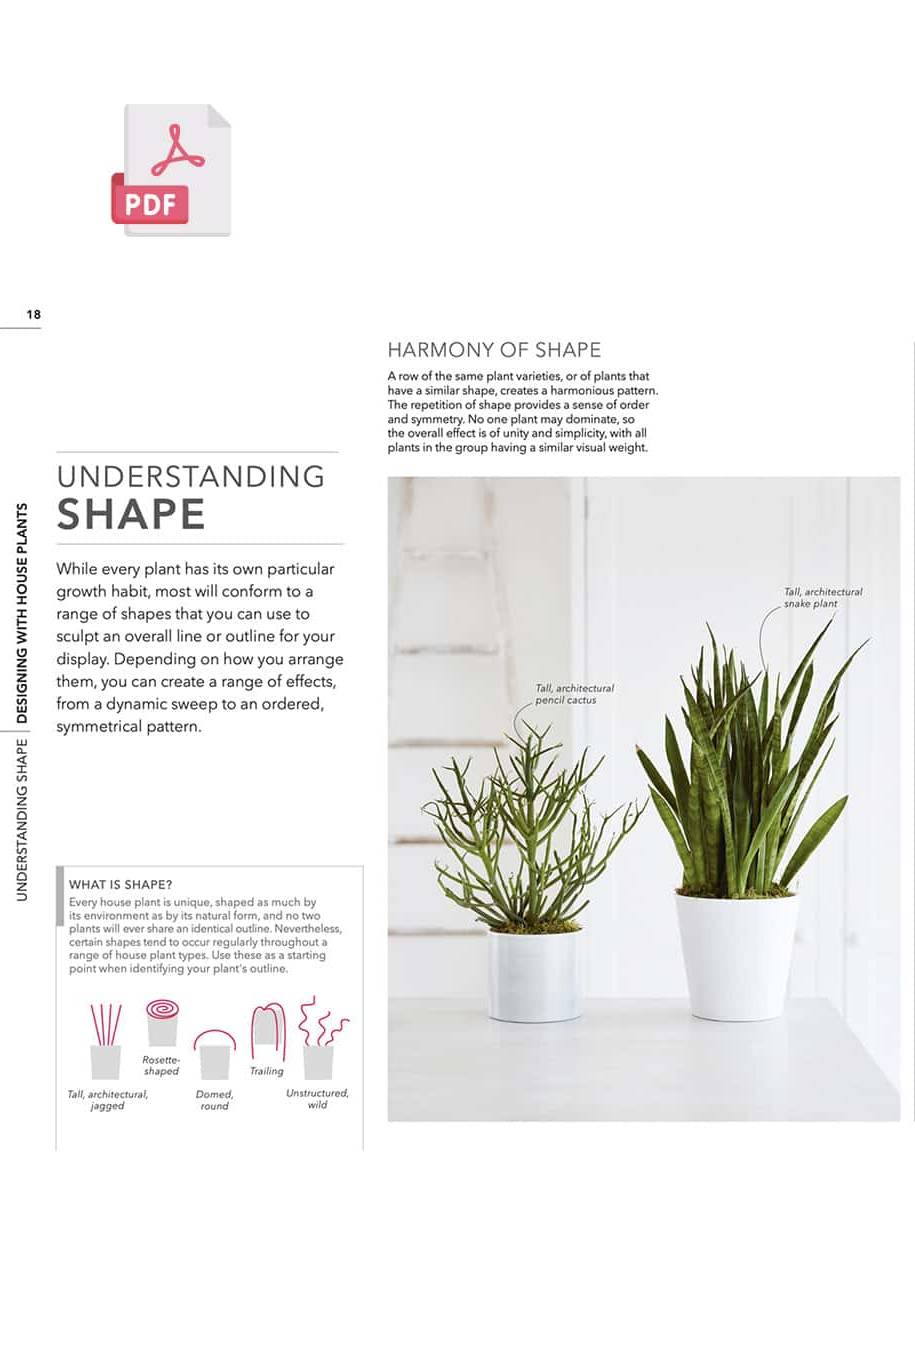 Practical House Plant Book - 224 pages